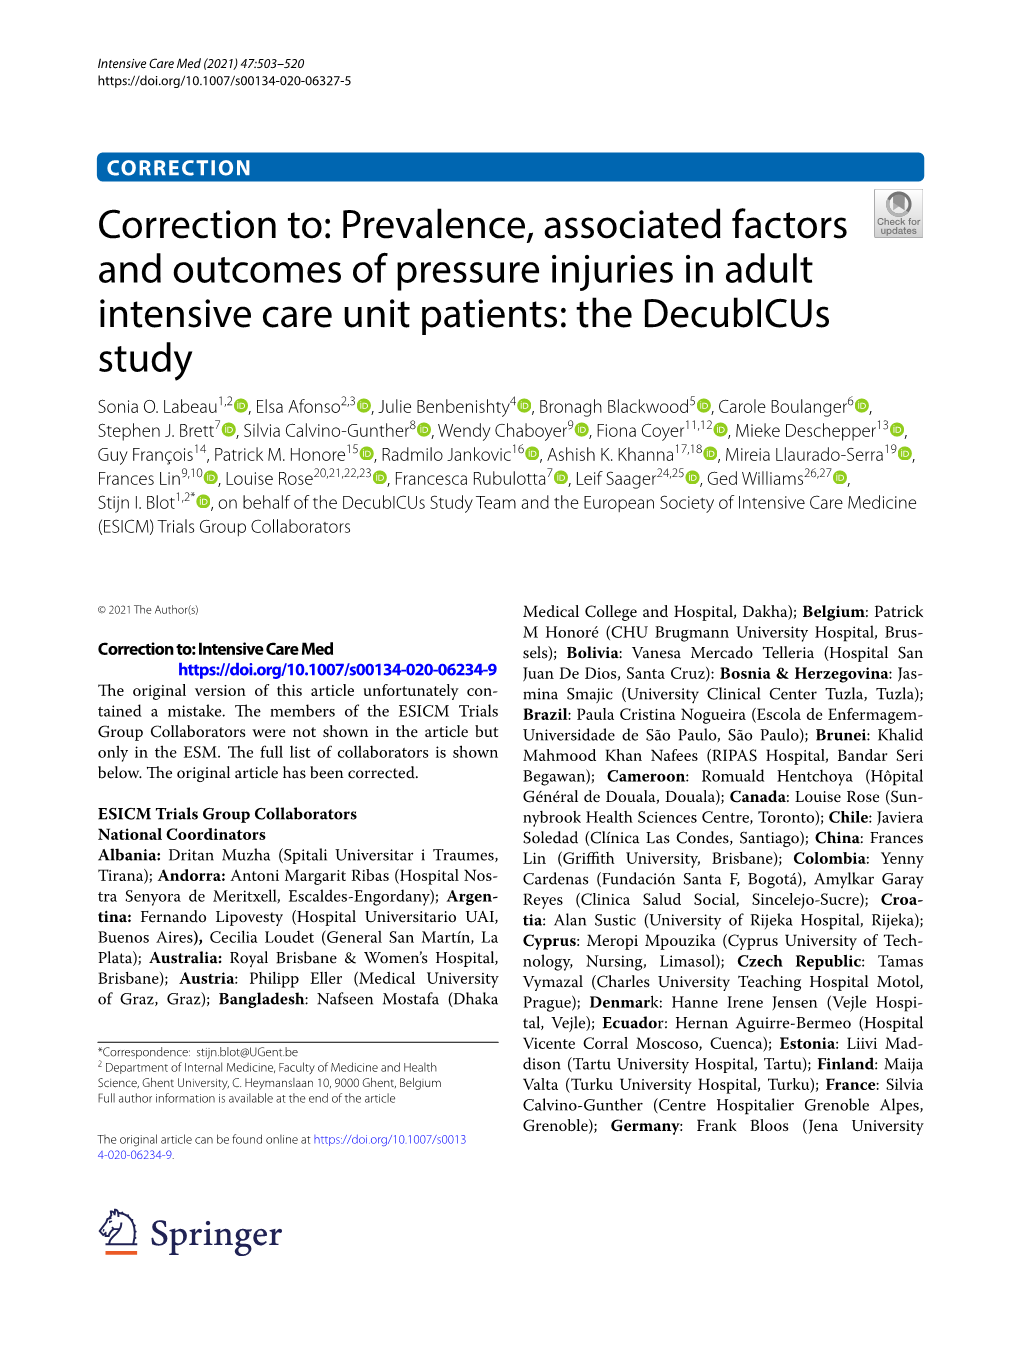 Prevalence, Associated Factors and Outcomes of Pressure Injuries in Adult Intensive Care Unit Patients: the Decubicus Study Sonia O